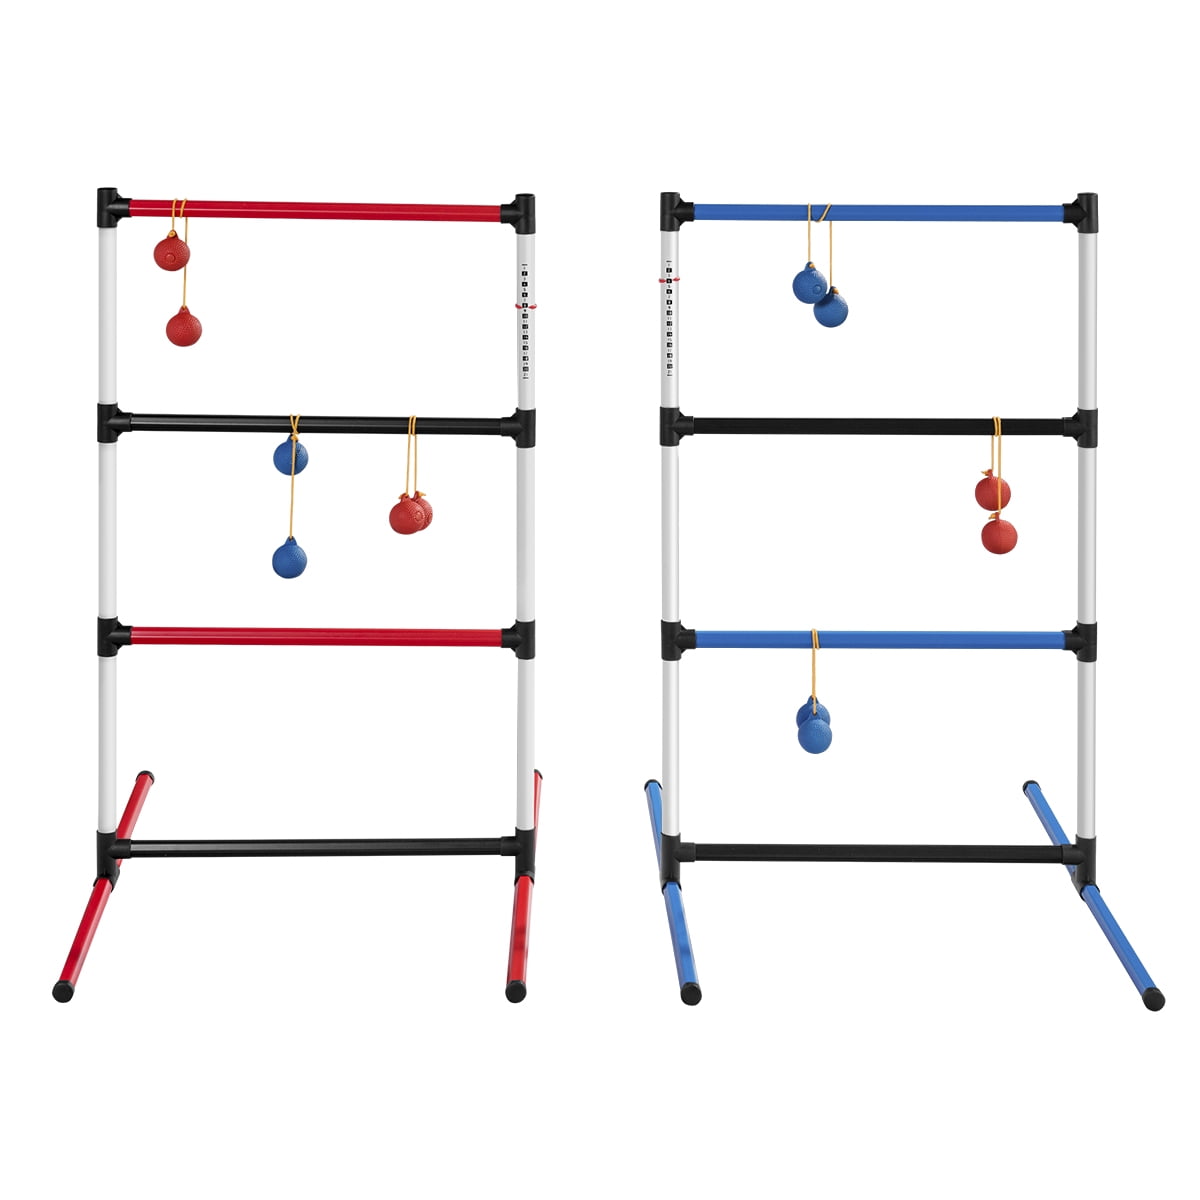 US Portable Ladder Ball Toss Game Set Indoor Outdoor Patio Backyard Lawn Game 